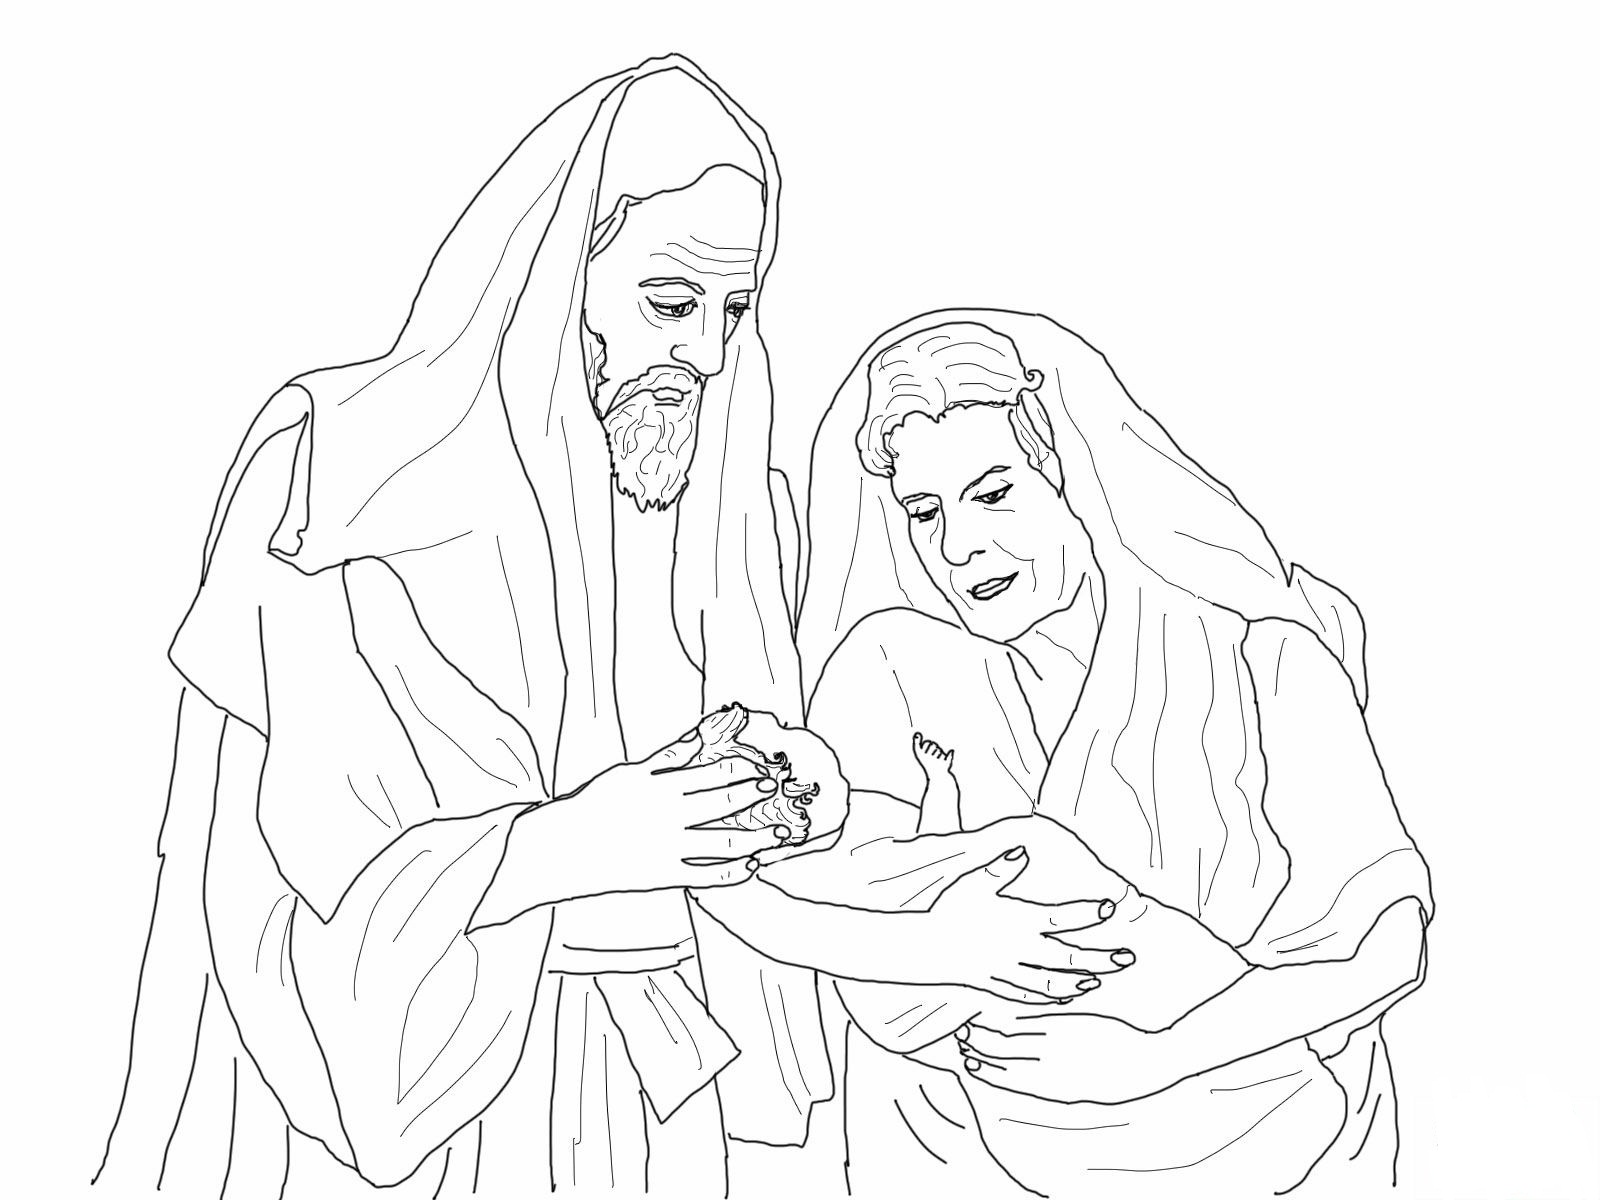 abraham and the promise coloring pages